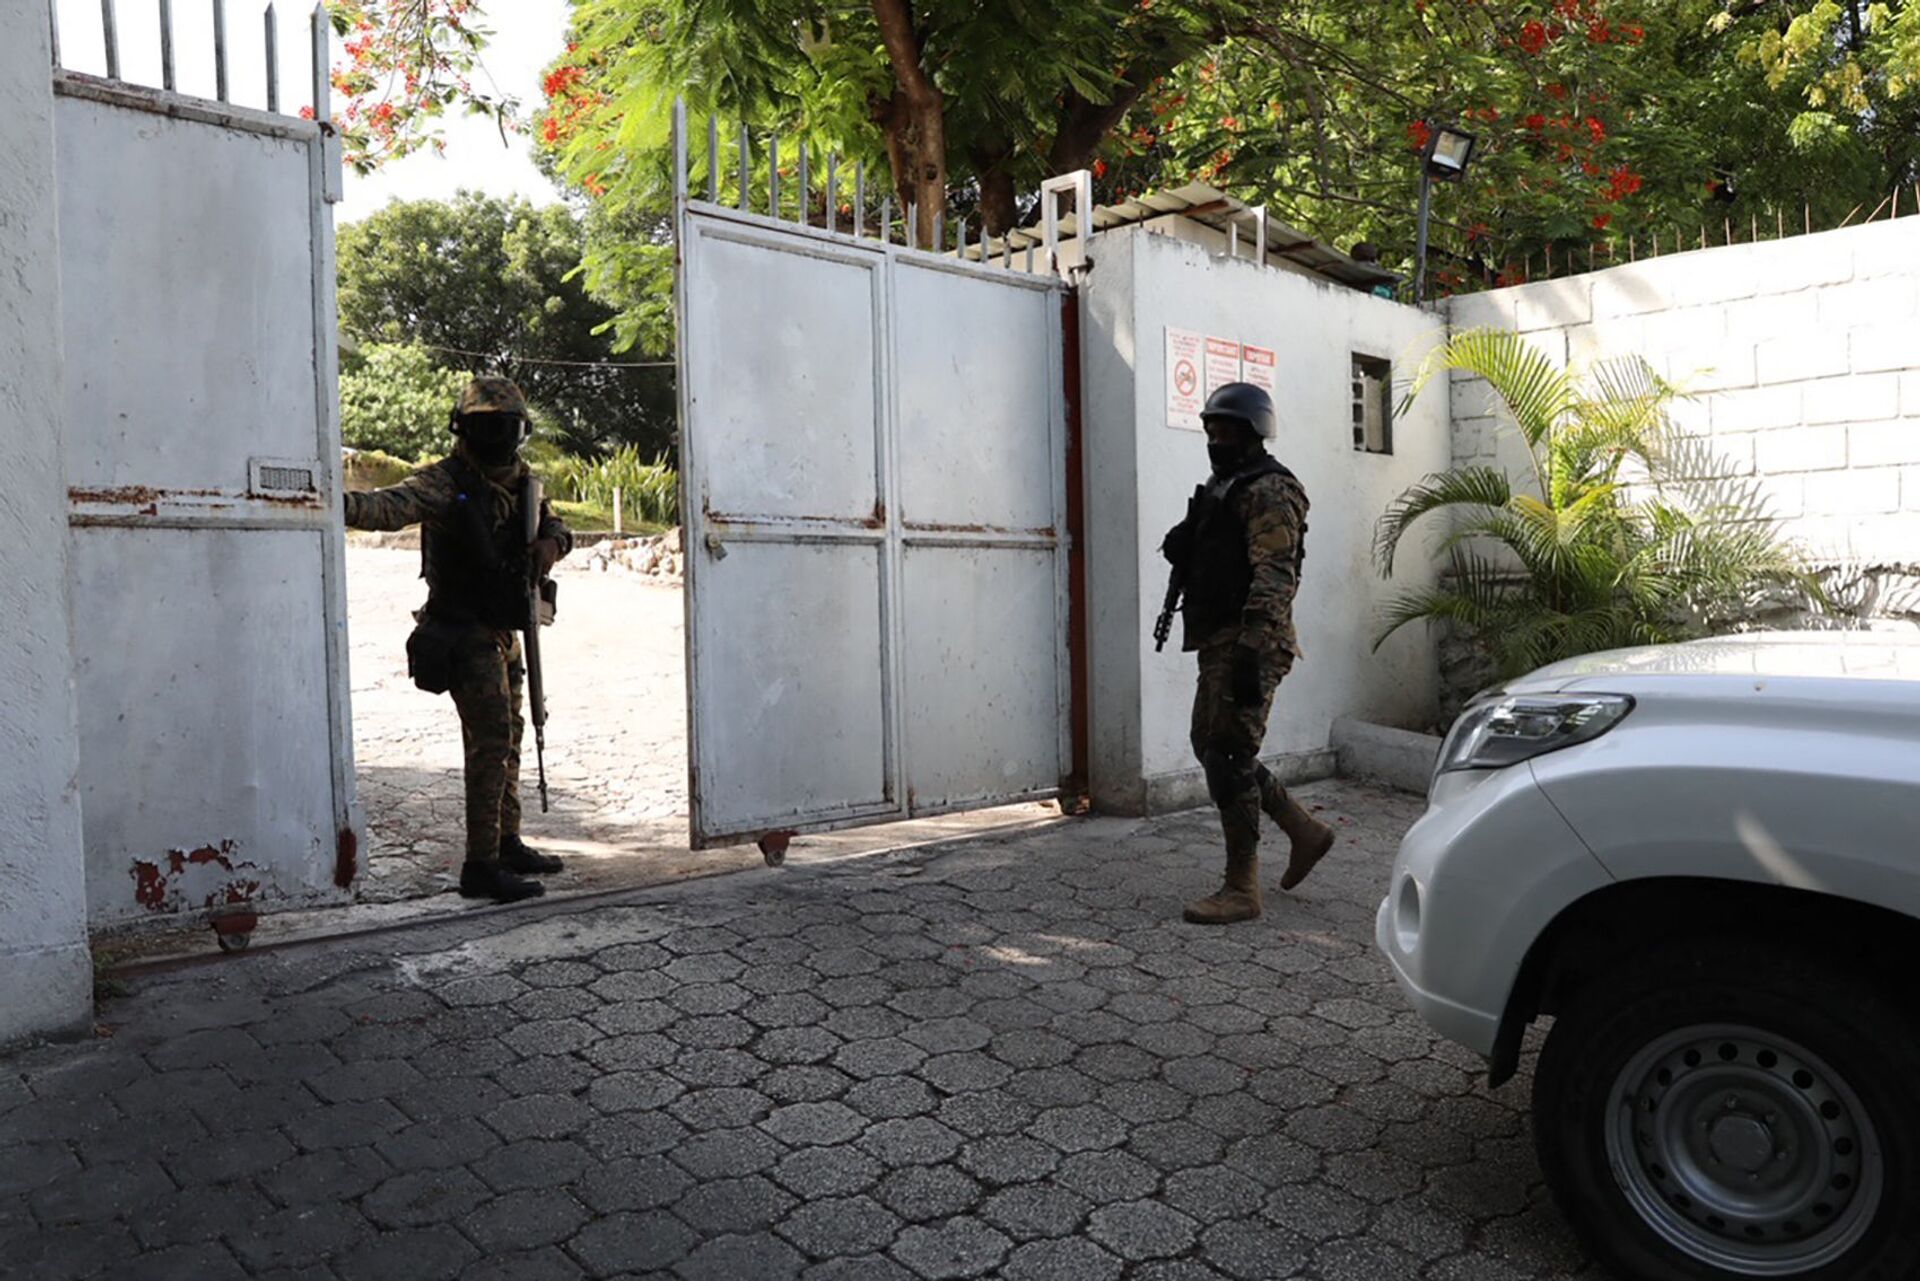 Members of the military are seen near the hospital where Haitian First Lady Martine Moise was taken on July 7, 2021 in Port-au-Prince, Haiti. - Haiti President Jovenel Moise was assassinated and his wife wounded early July 7, 2021 in an attack at their home, the interim prime minister announced, an act that risks further destabilizing the Caribbean nation beset by gang violence and political volatility. Claude Joseph said he was now in charge of the country and urged the public to remain calm, while insisting the police and army would ensure the population's safety.The capital Port-au-prince as quiet on Wednesday morning with no extra security forces on patrol, witnesses reported. - Sputnik International, 1920, 07.09.2021